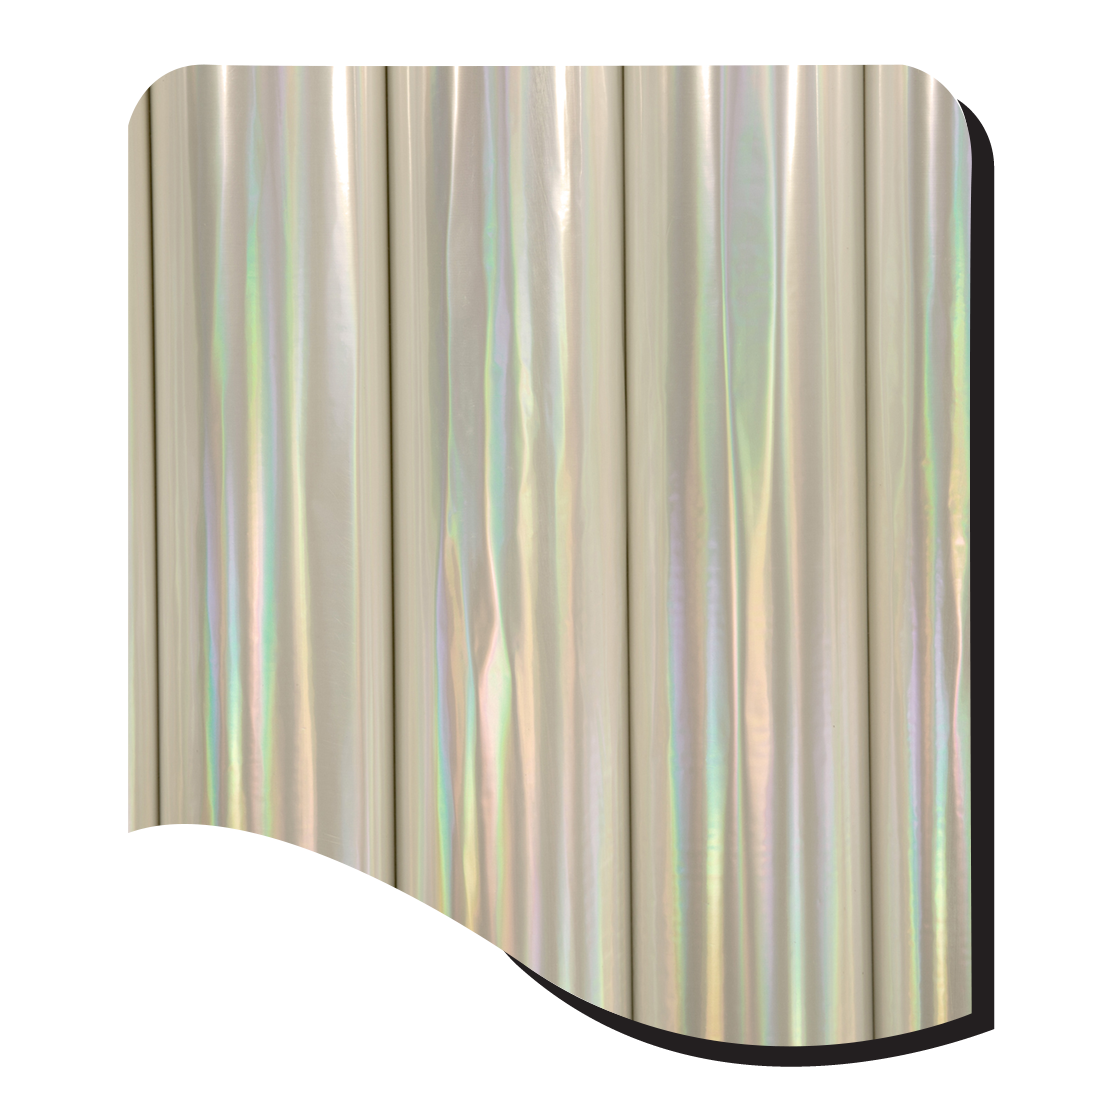 9001-CLEAR HOLOGRAPHIC SEAMLESS RAINBOW